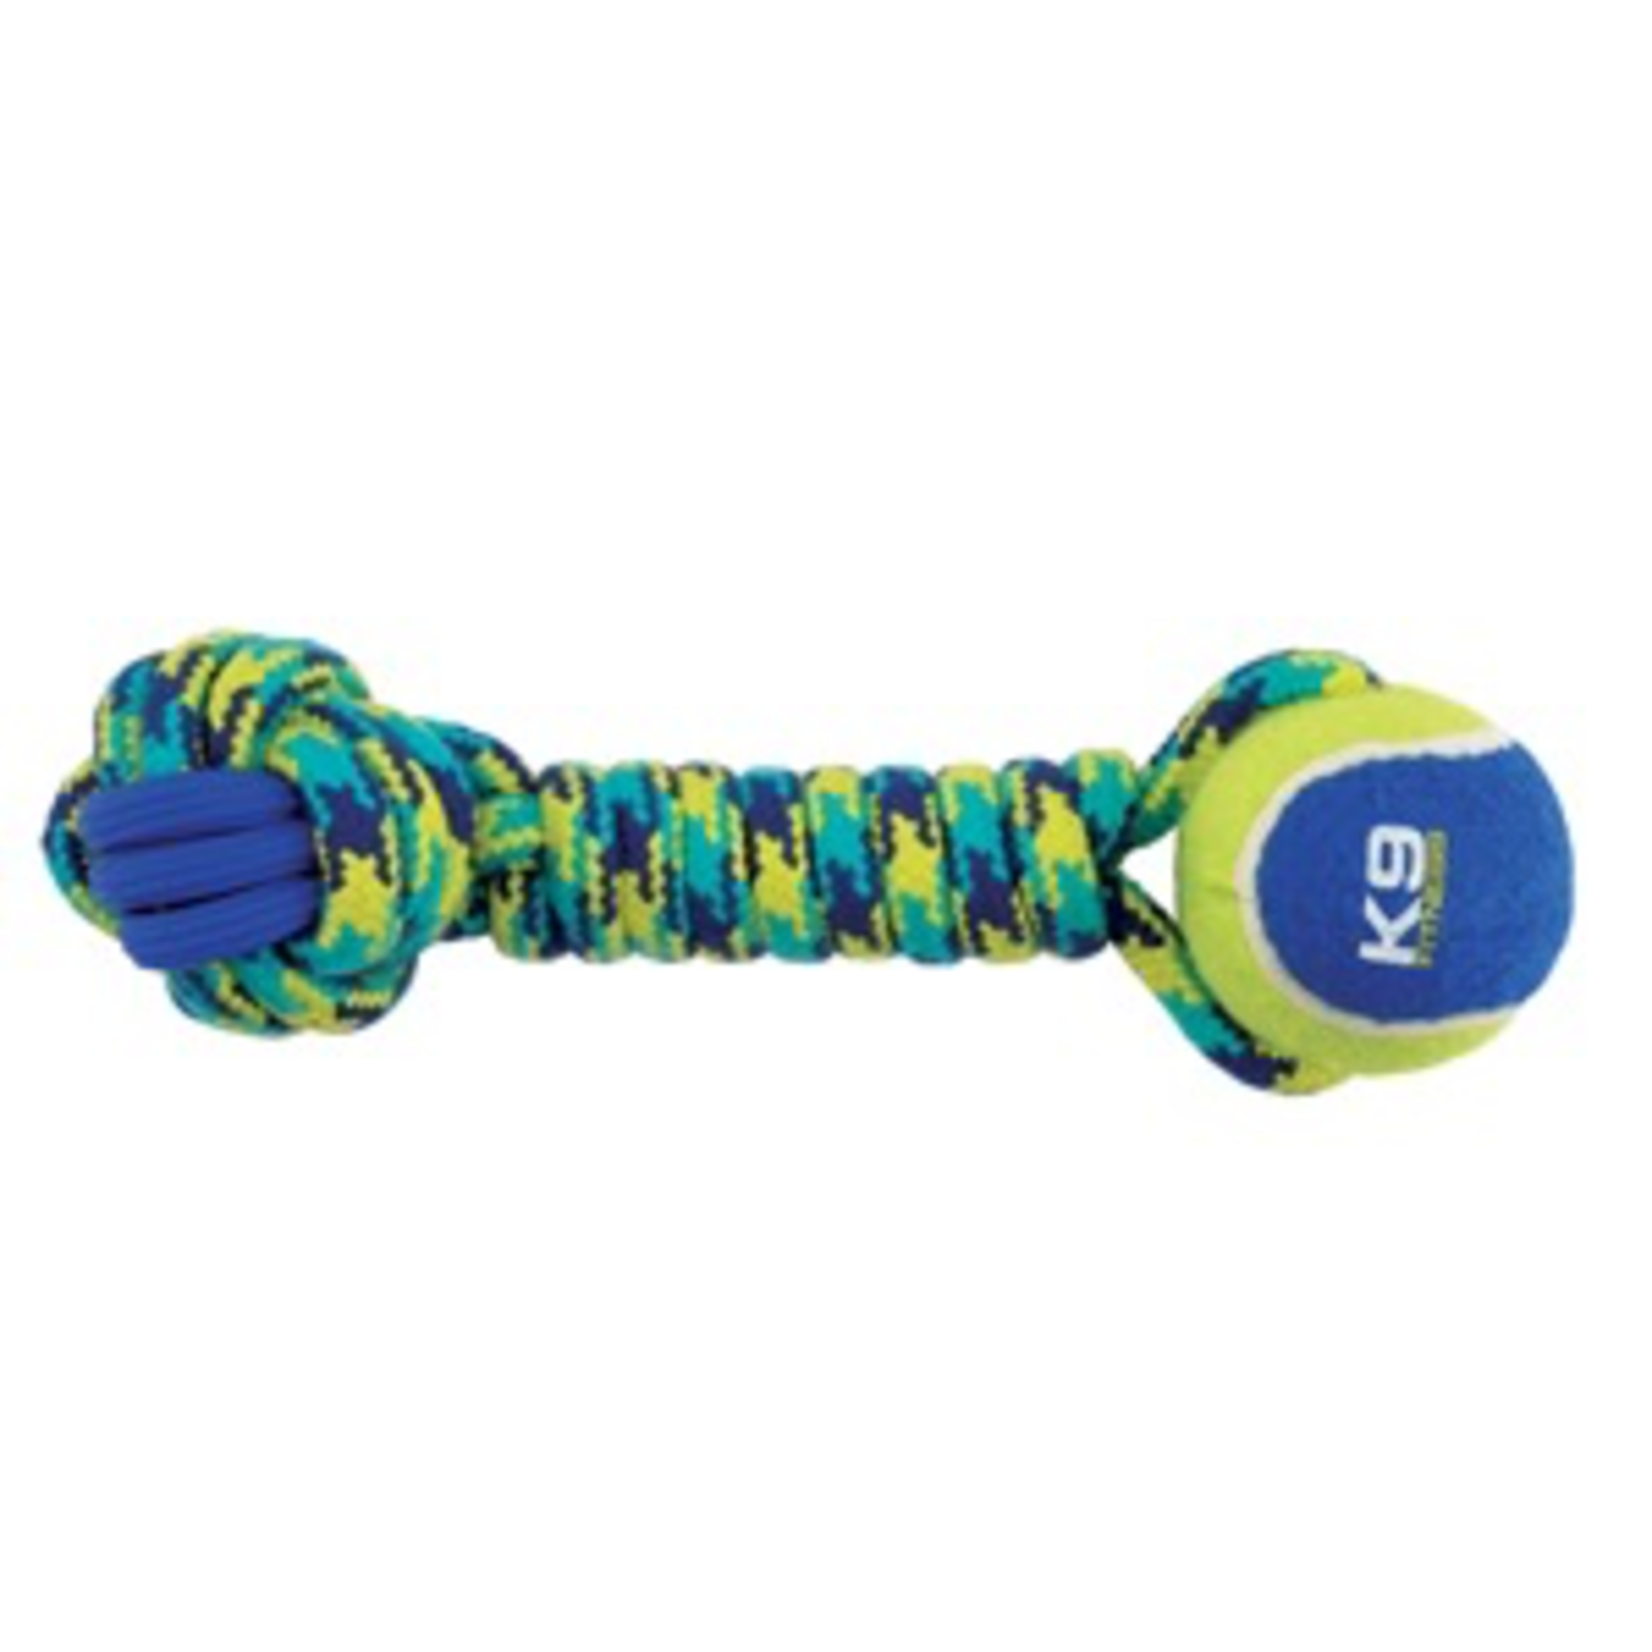 (W) K9 Fitness by Zeus Rope and TPR Tennis Ball Dumbbell - 30.48 cm dia. (12 in dia.)